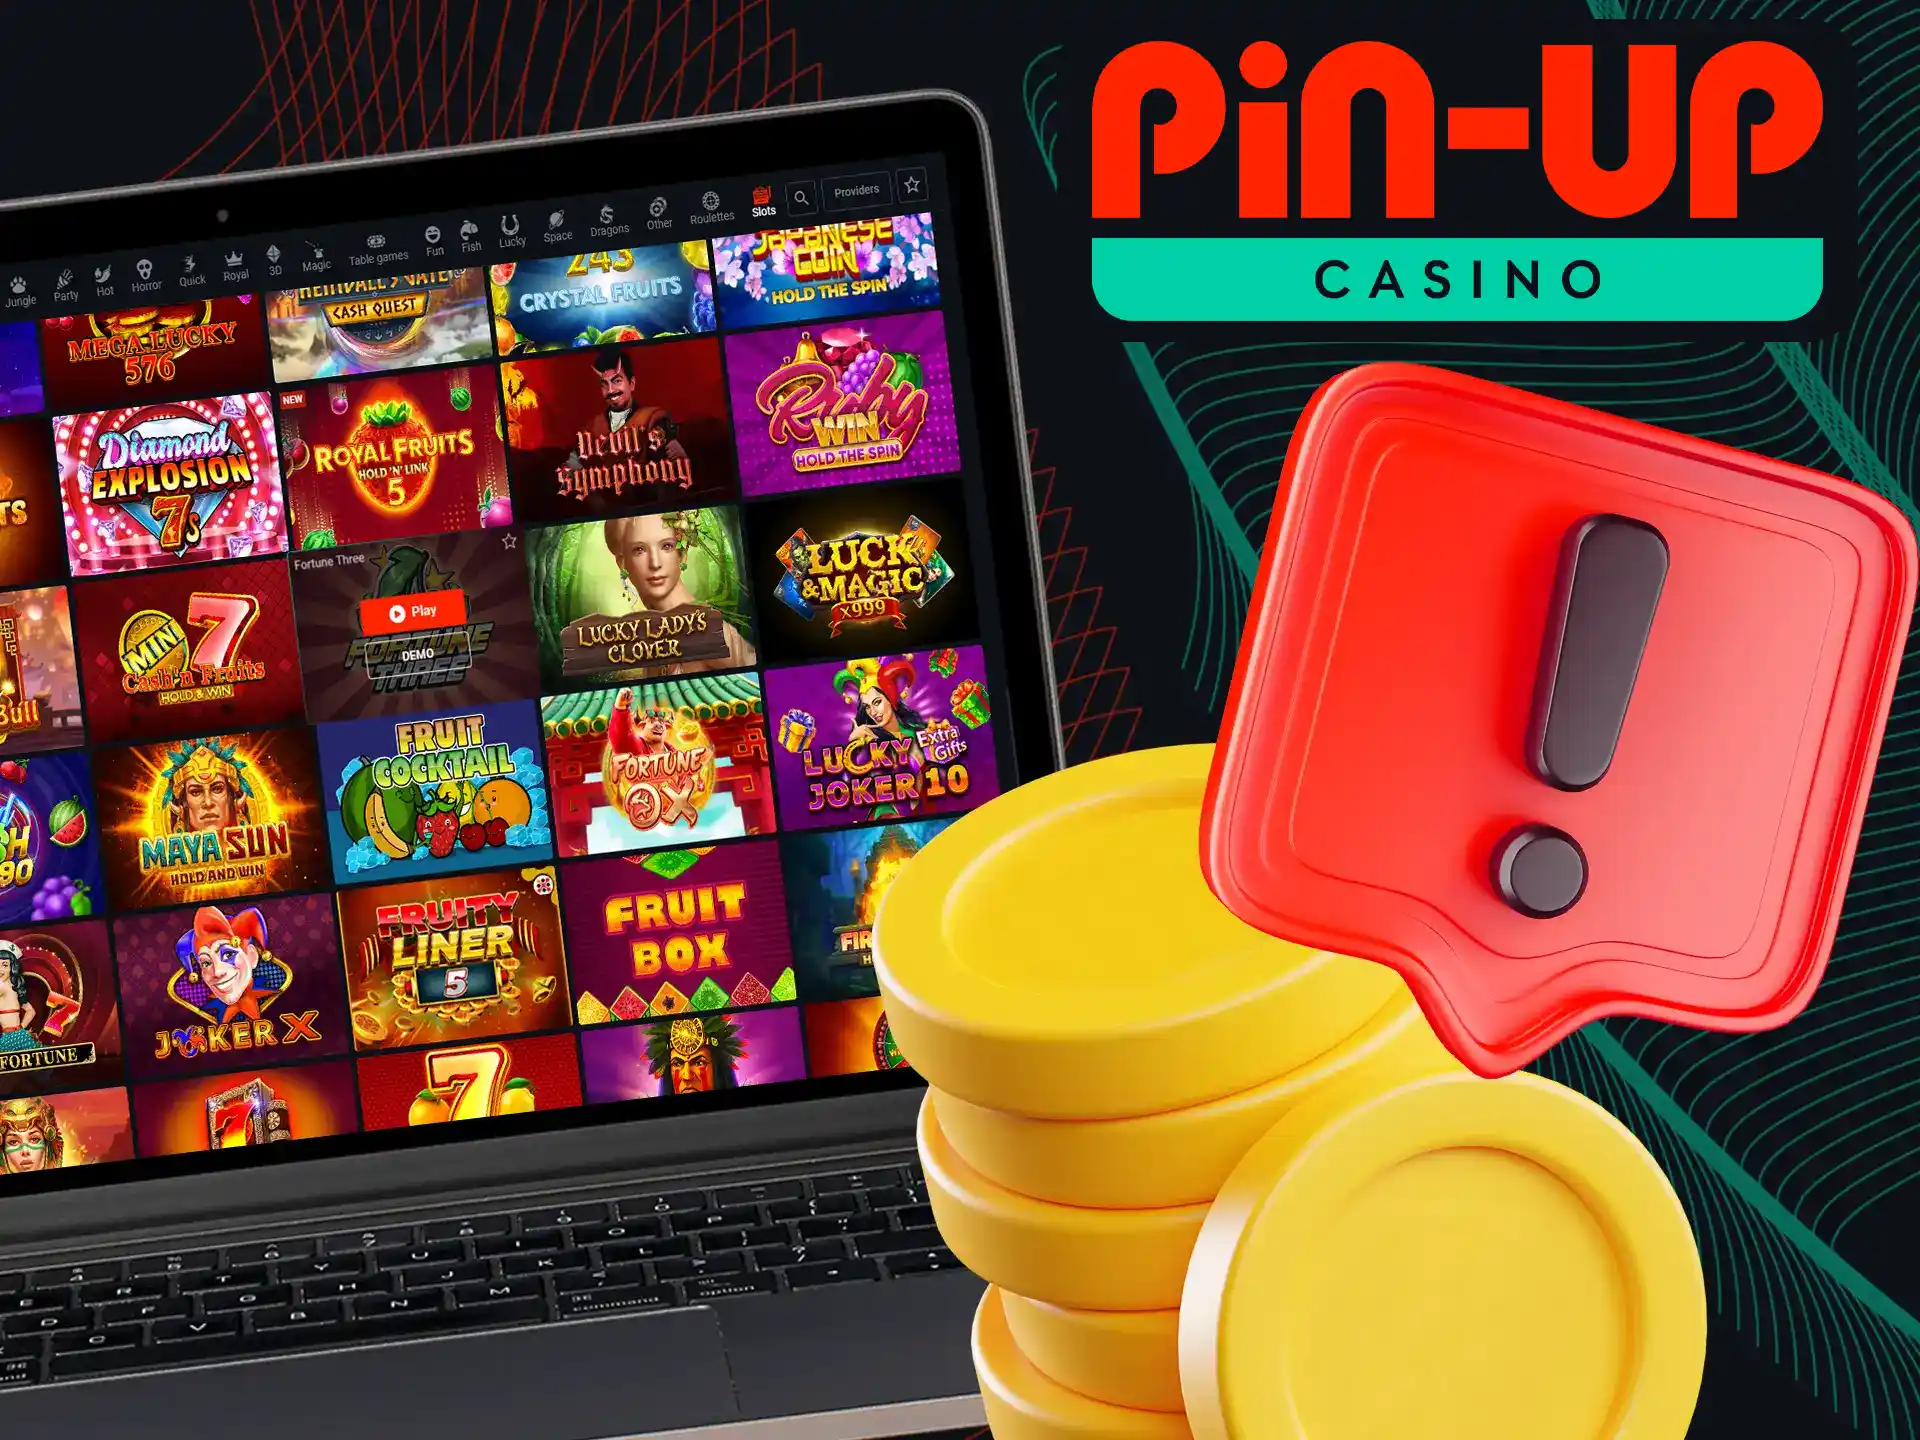 Try out slot games for free in demo mode or play for real money at Pin-Up Casino.